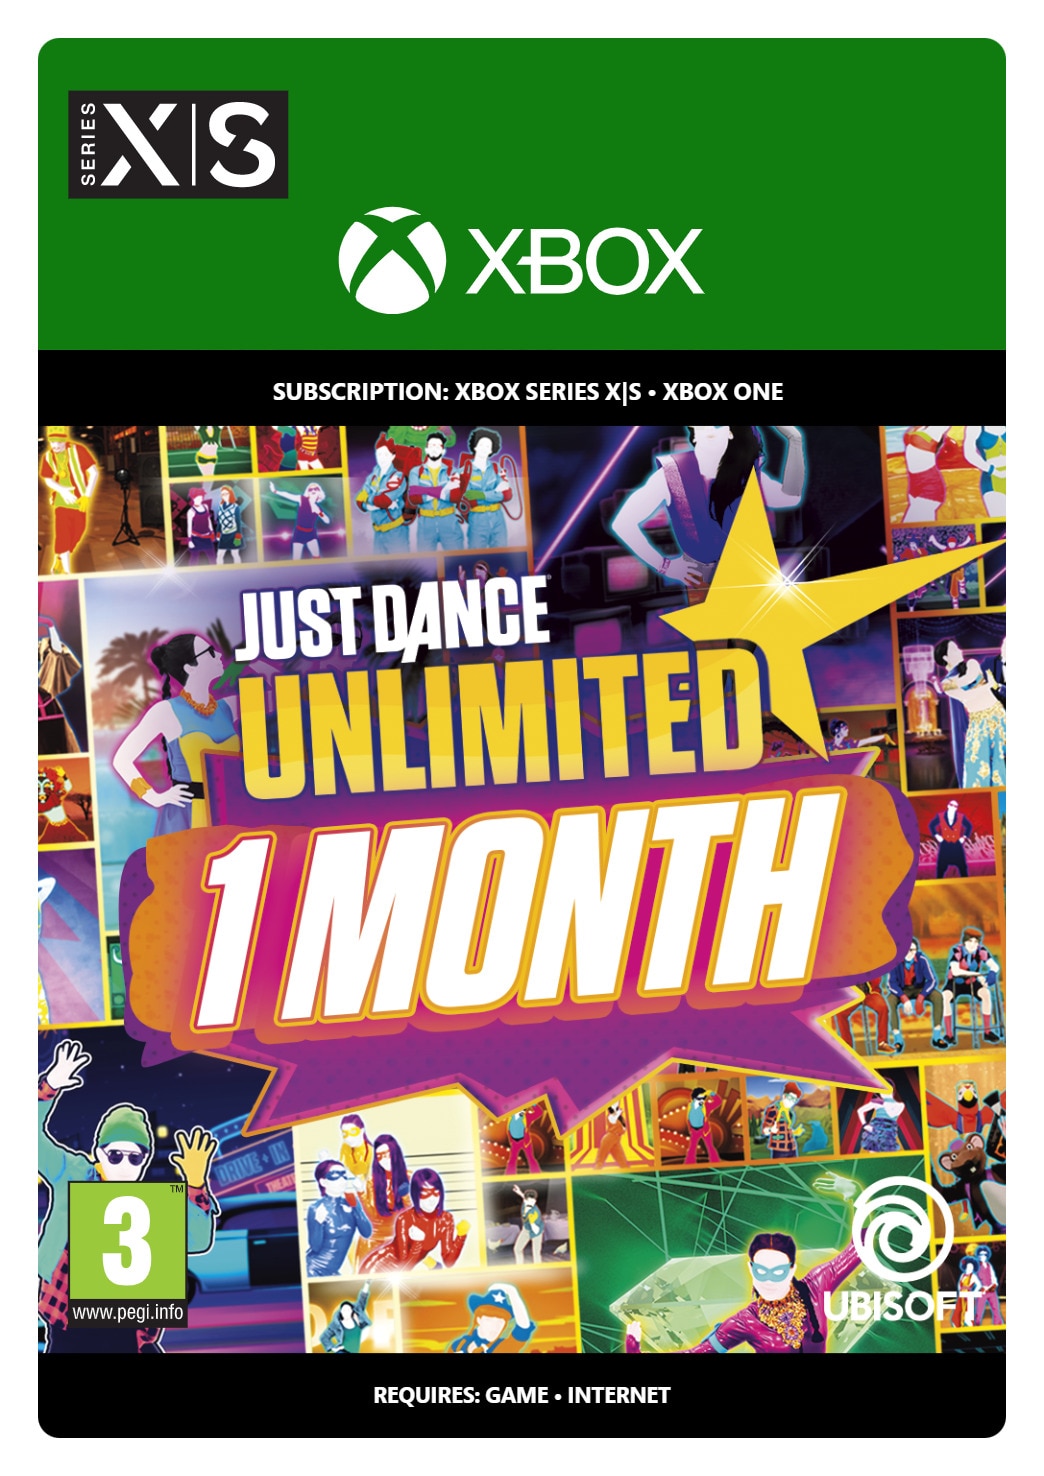 Just Dance® Unlimited (1 Month) - XBOX One,Xbox Series X,Xbox Series S